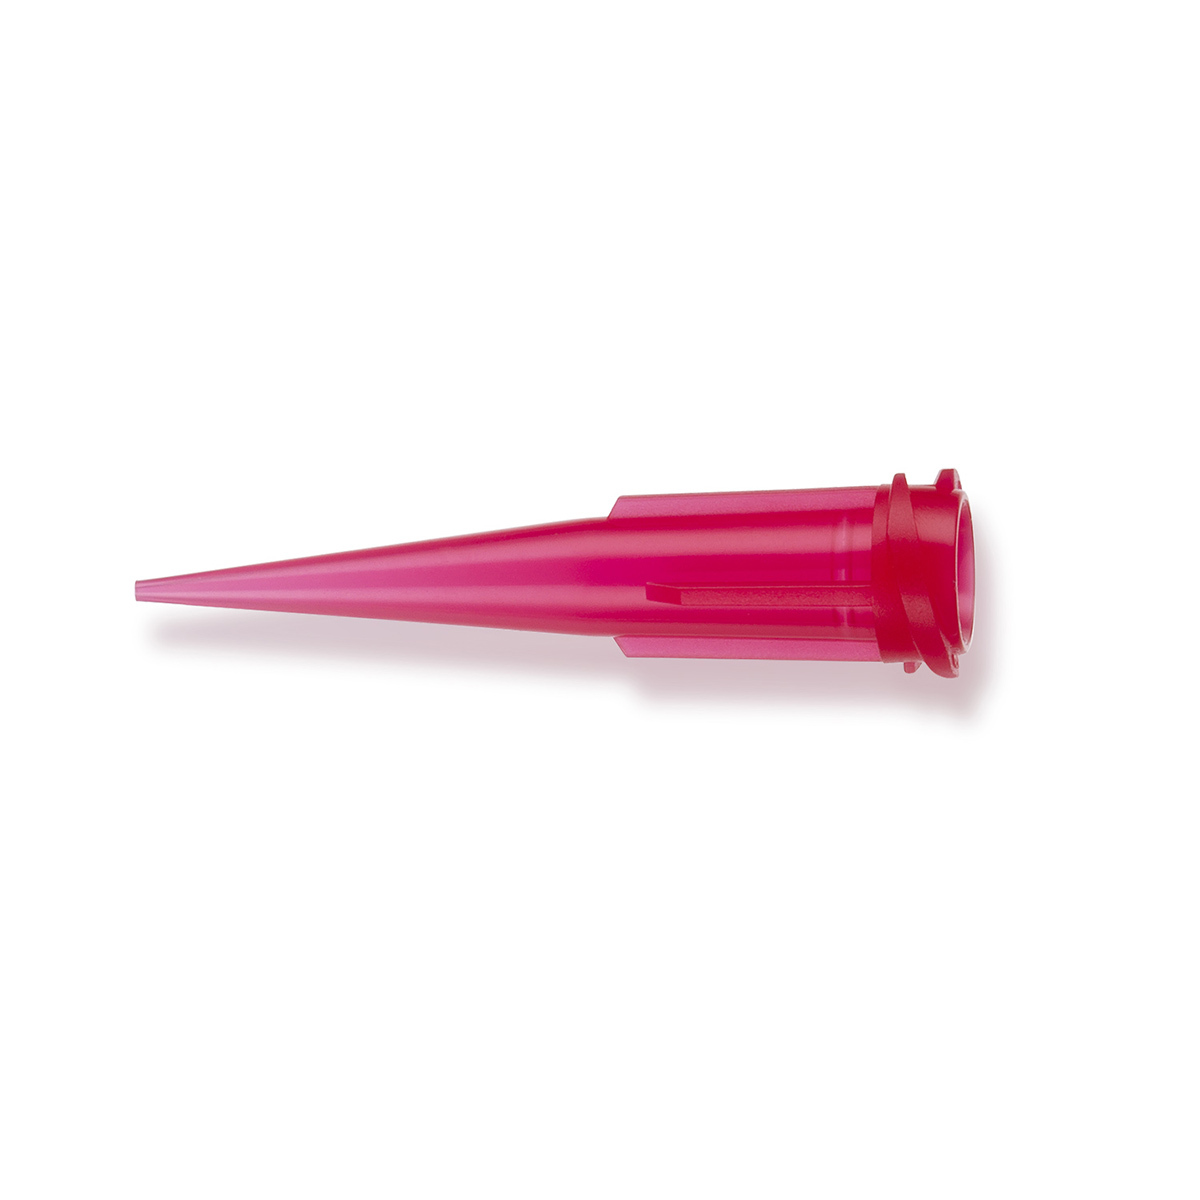 Corning® Standard Conical Bioprinting Nozzles, 25G - 250 μm (Red)